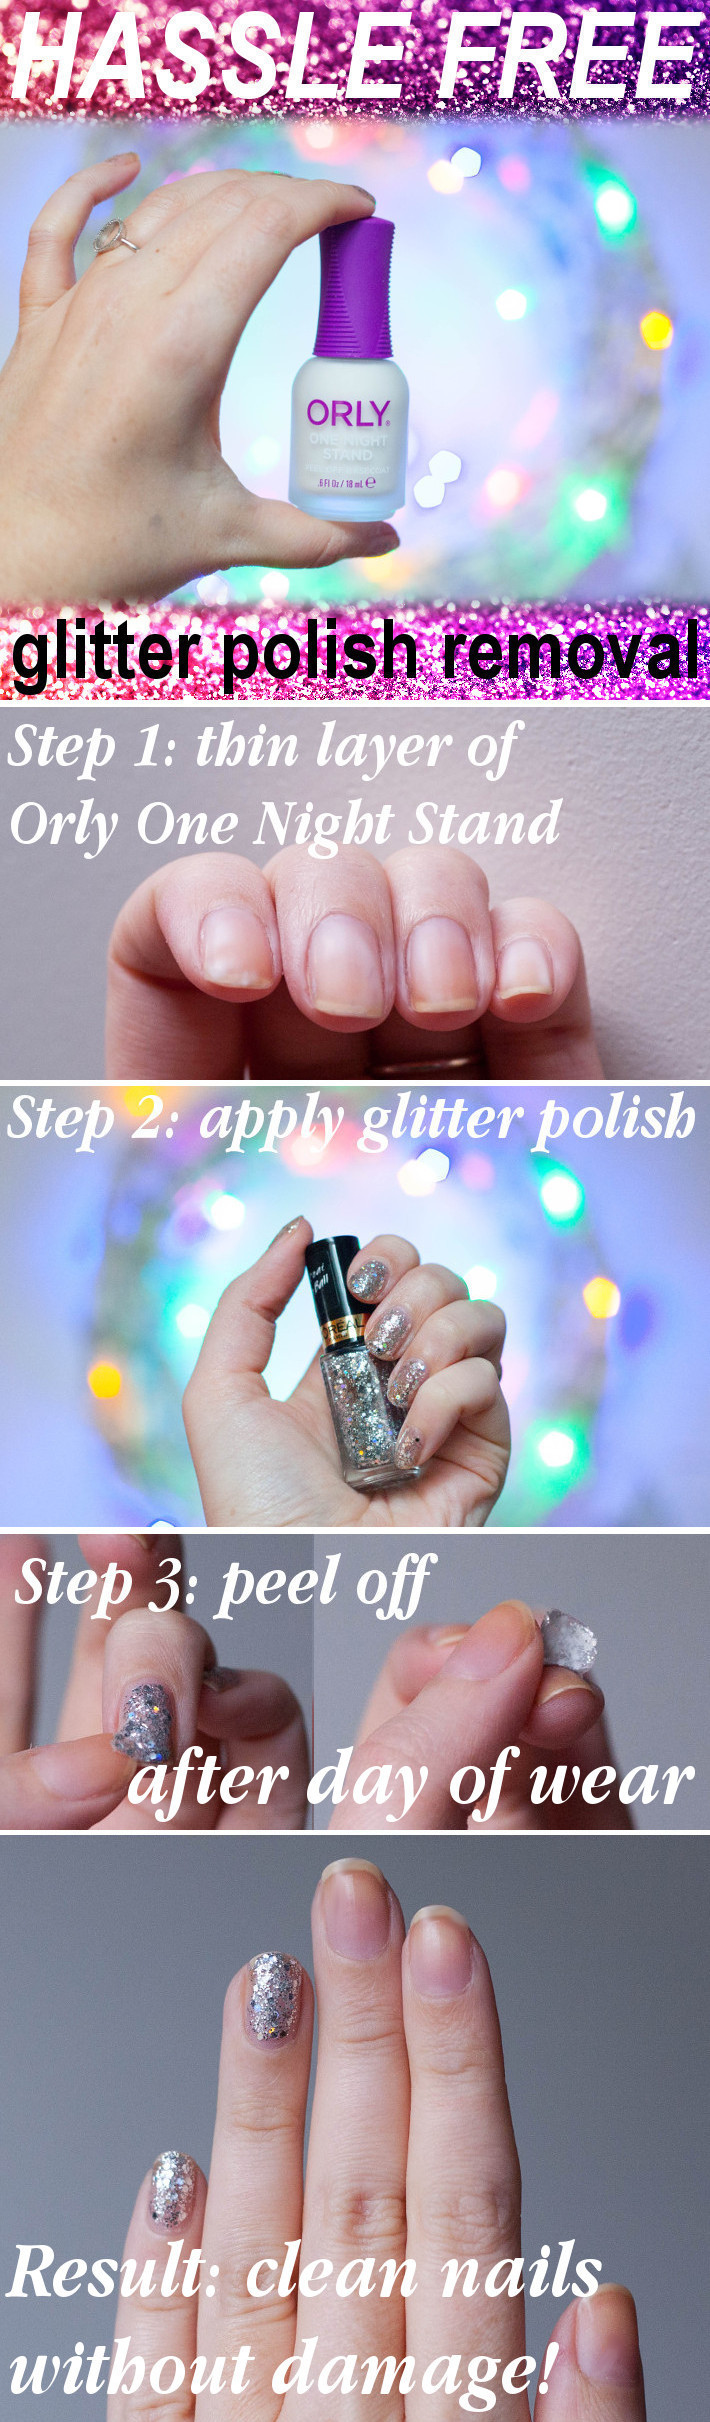 Beauty: Hassle free glitter polish removal with Orly One Night Stand